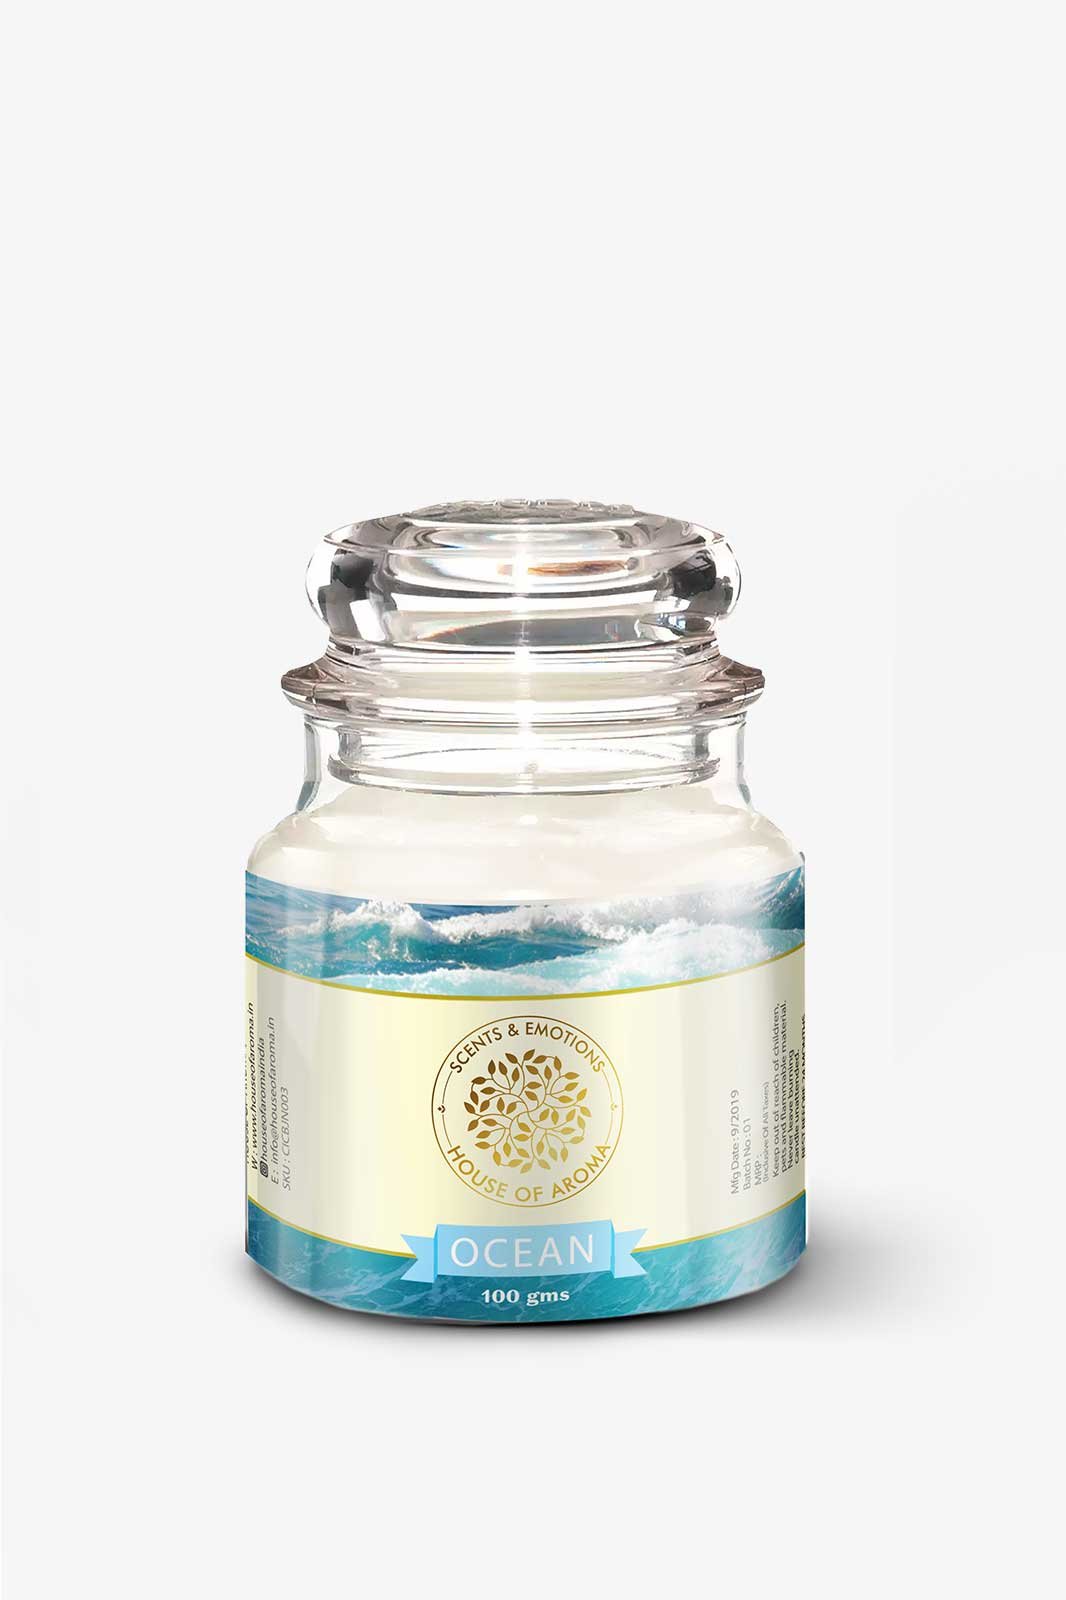 ocean bell jar candle, ocean scented candle, ocean aromatherapy candle, ocean breeze scented candles, ocean candle jar, ocean candle scents, ocean serenity candle, ocean smell candle, ocean soy candles, House of Aroma, scented candles online, home decor scented candles, organic scented candles, online scented candles, home decor candle, buy scented candles online, room decor candles, best scented candles online, organic candles India, aroma candles online India, organic scents for candles, organic soy candles, natural scented beeswax candles, benefits scented candles, aroma candles buy online, scented candles for home decor, best scents of candles, organic natural scented candles, home decor aroma candles, scented candles order online, organic soy candle wax, best home scented candles, best organic scented candles, organic scented oils, best fragrance scented candles, organic aroma for candles, organic soy for candles, aroma scented candles, scented candle brand, aroma diffuser candle, essential oil for scented candles, aroma candles gift set, best aroma candles in India